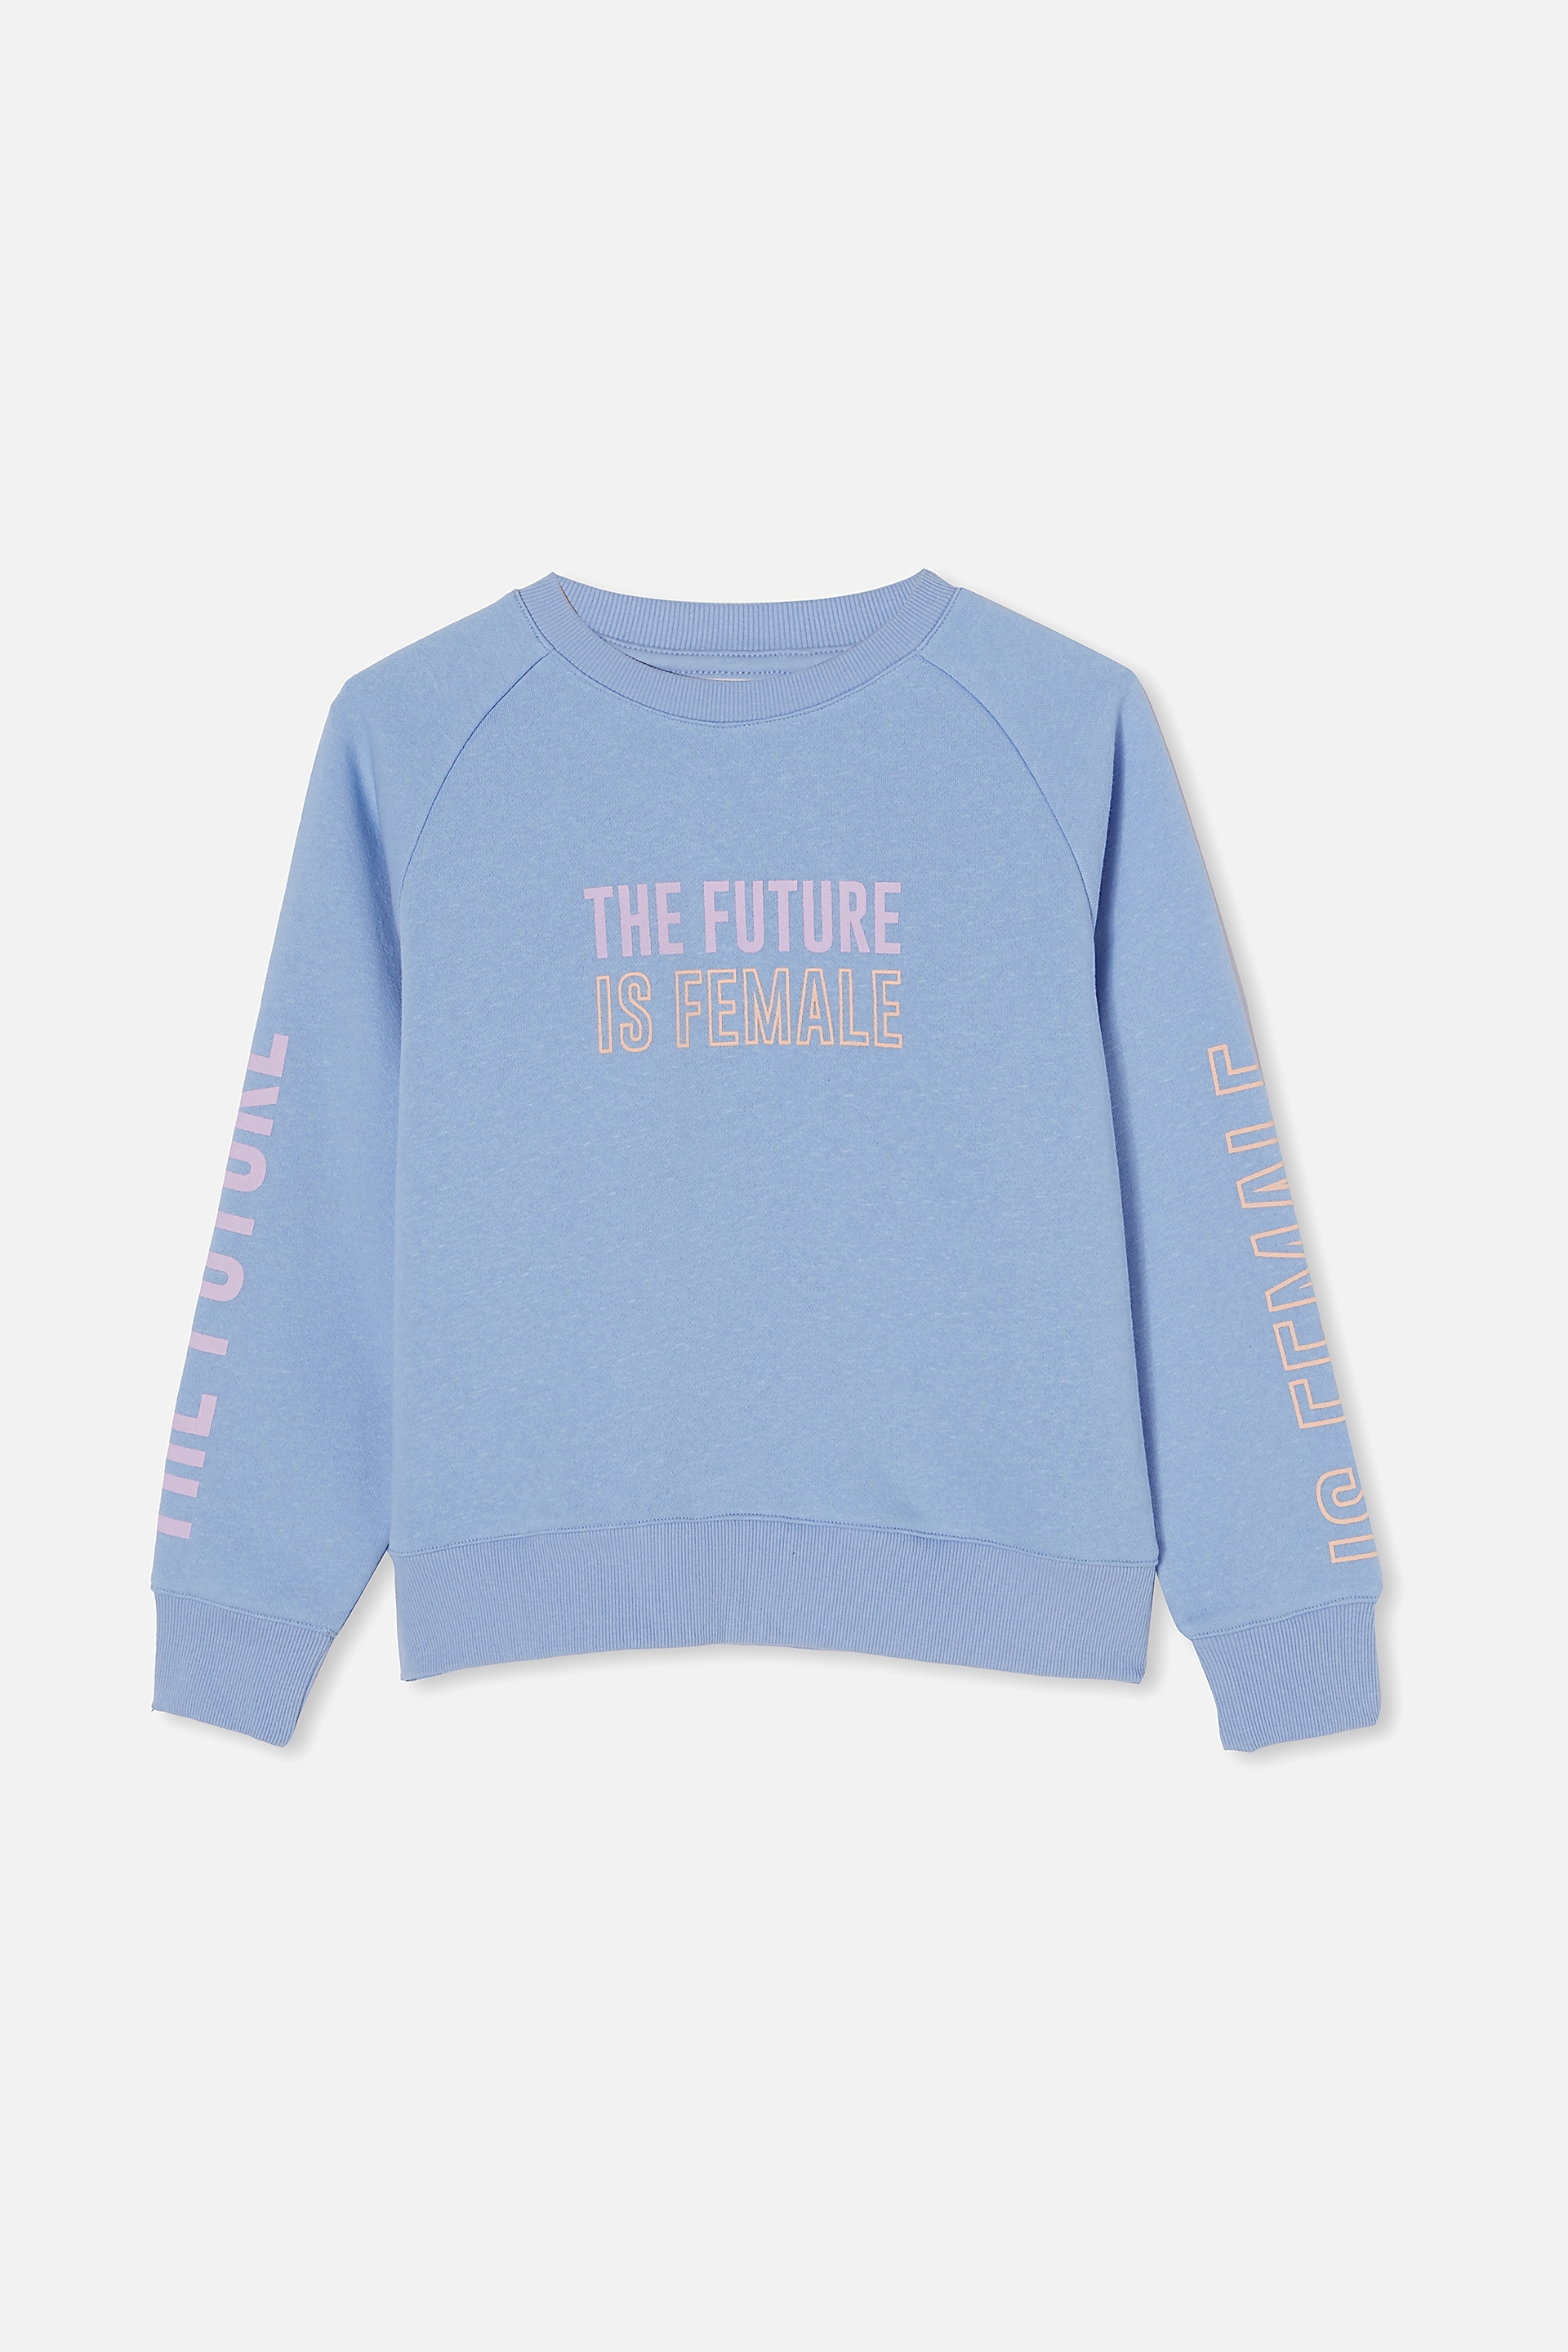 Free by Cotton On - Boxy Crew Neck Jumper - Dusk blue/ future is female